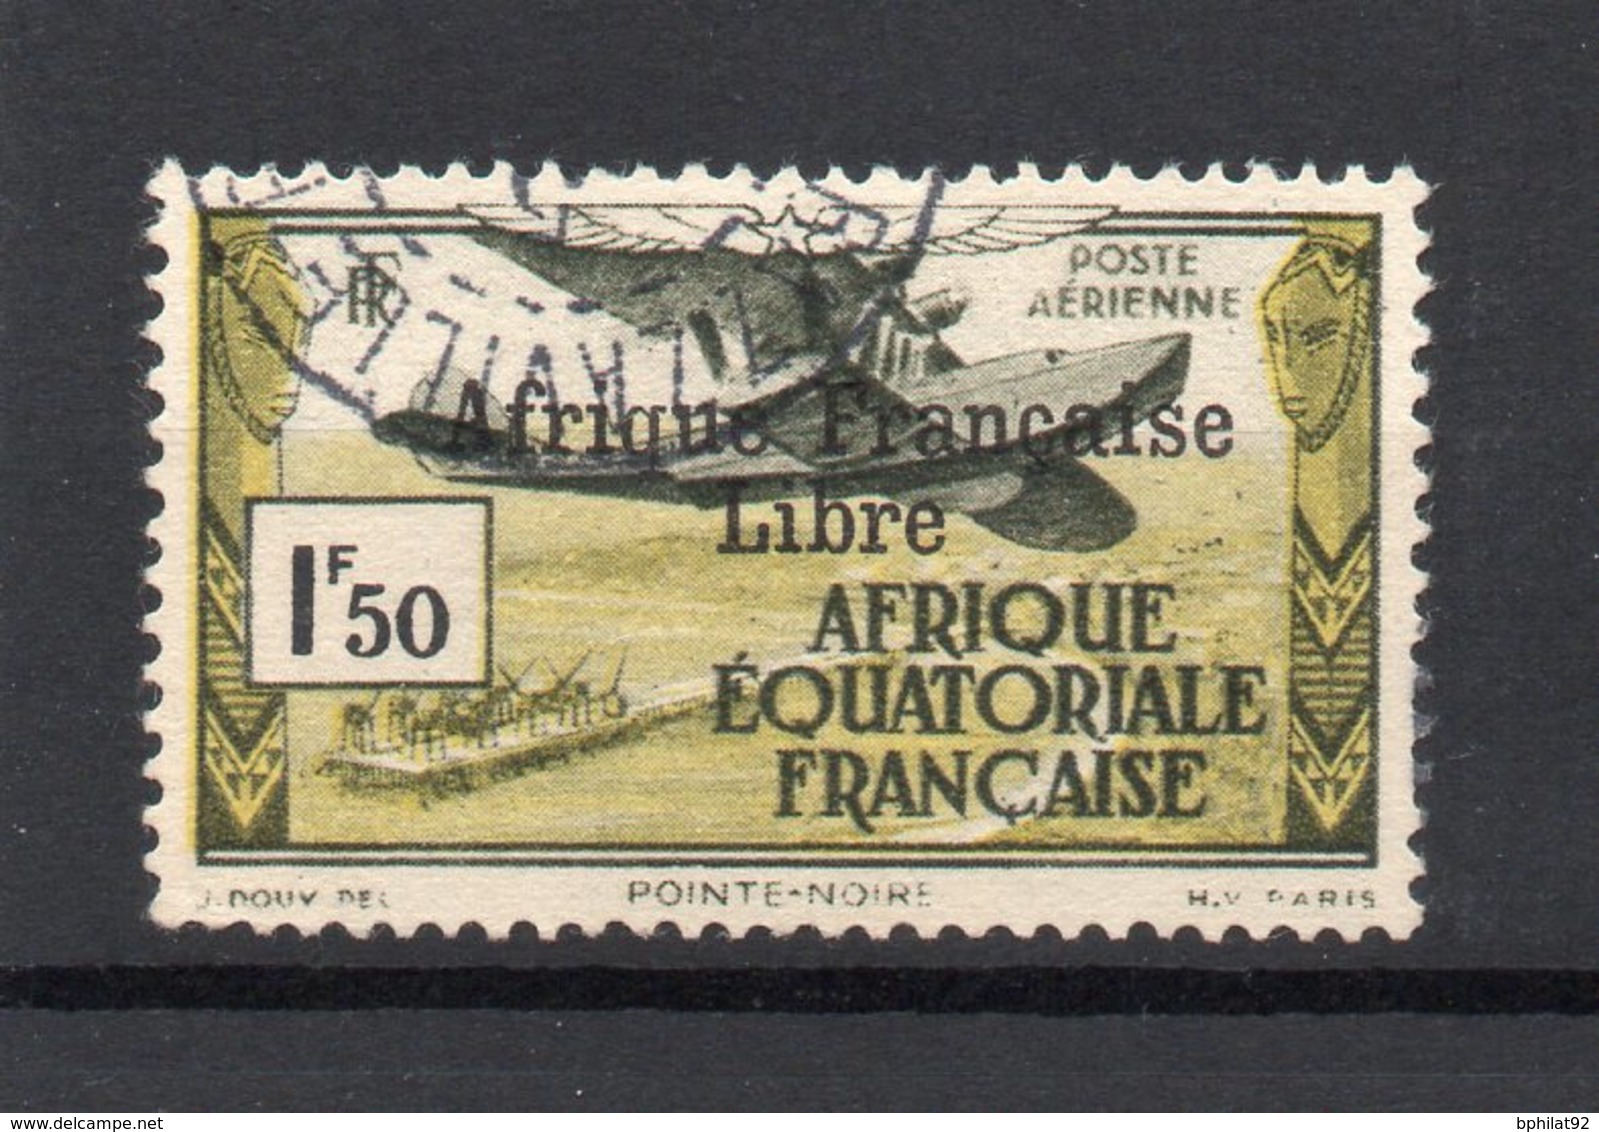 !!! PRIX FIXE : AEF, PA N°14 OBLITEREE - Used Stamps